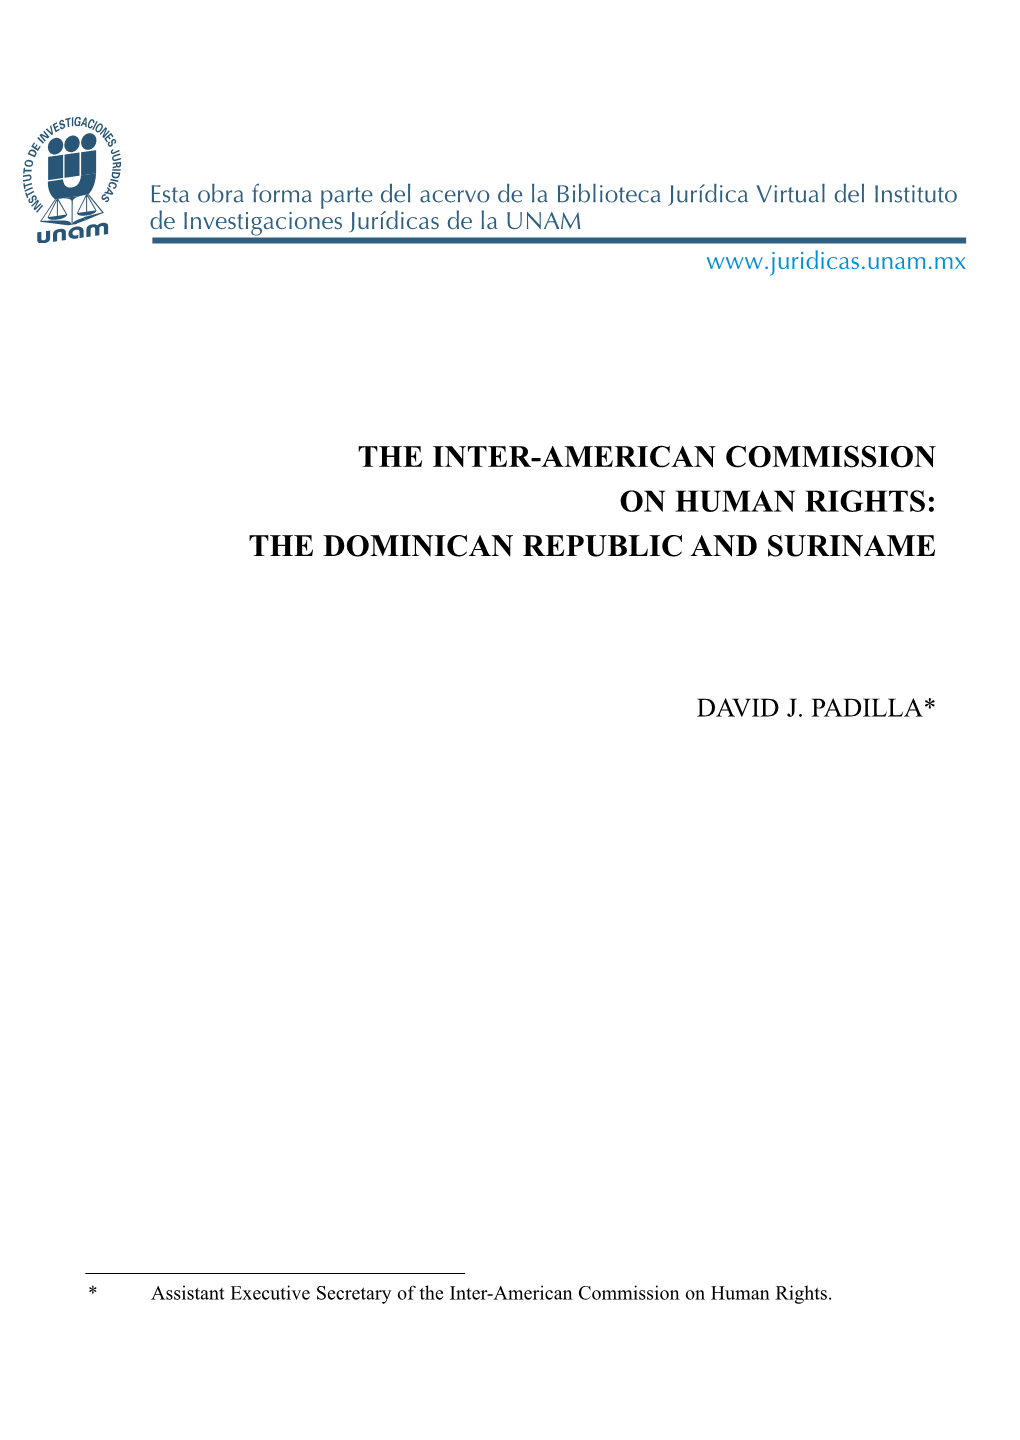 The Inter-American Commission on Human Rights: the Dominican Republic and Suriname